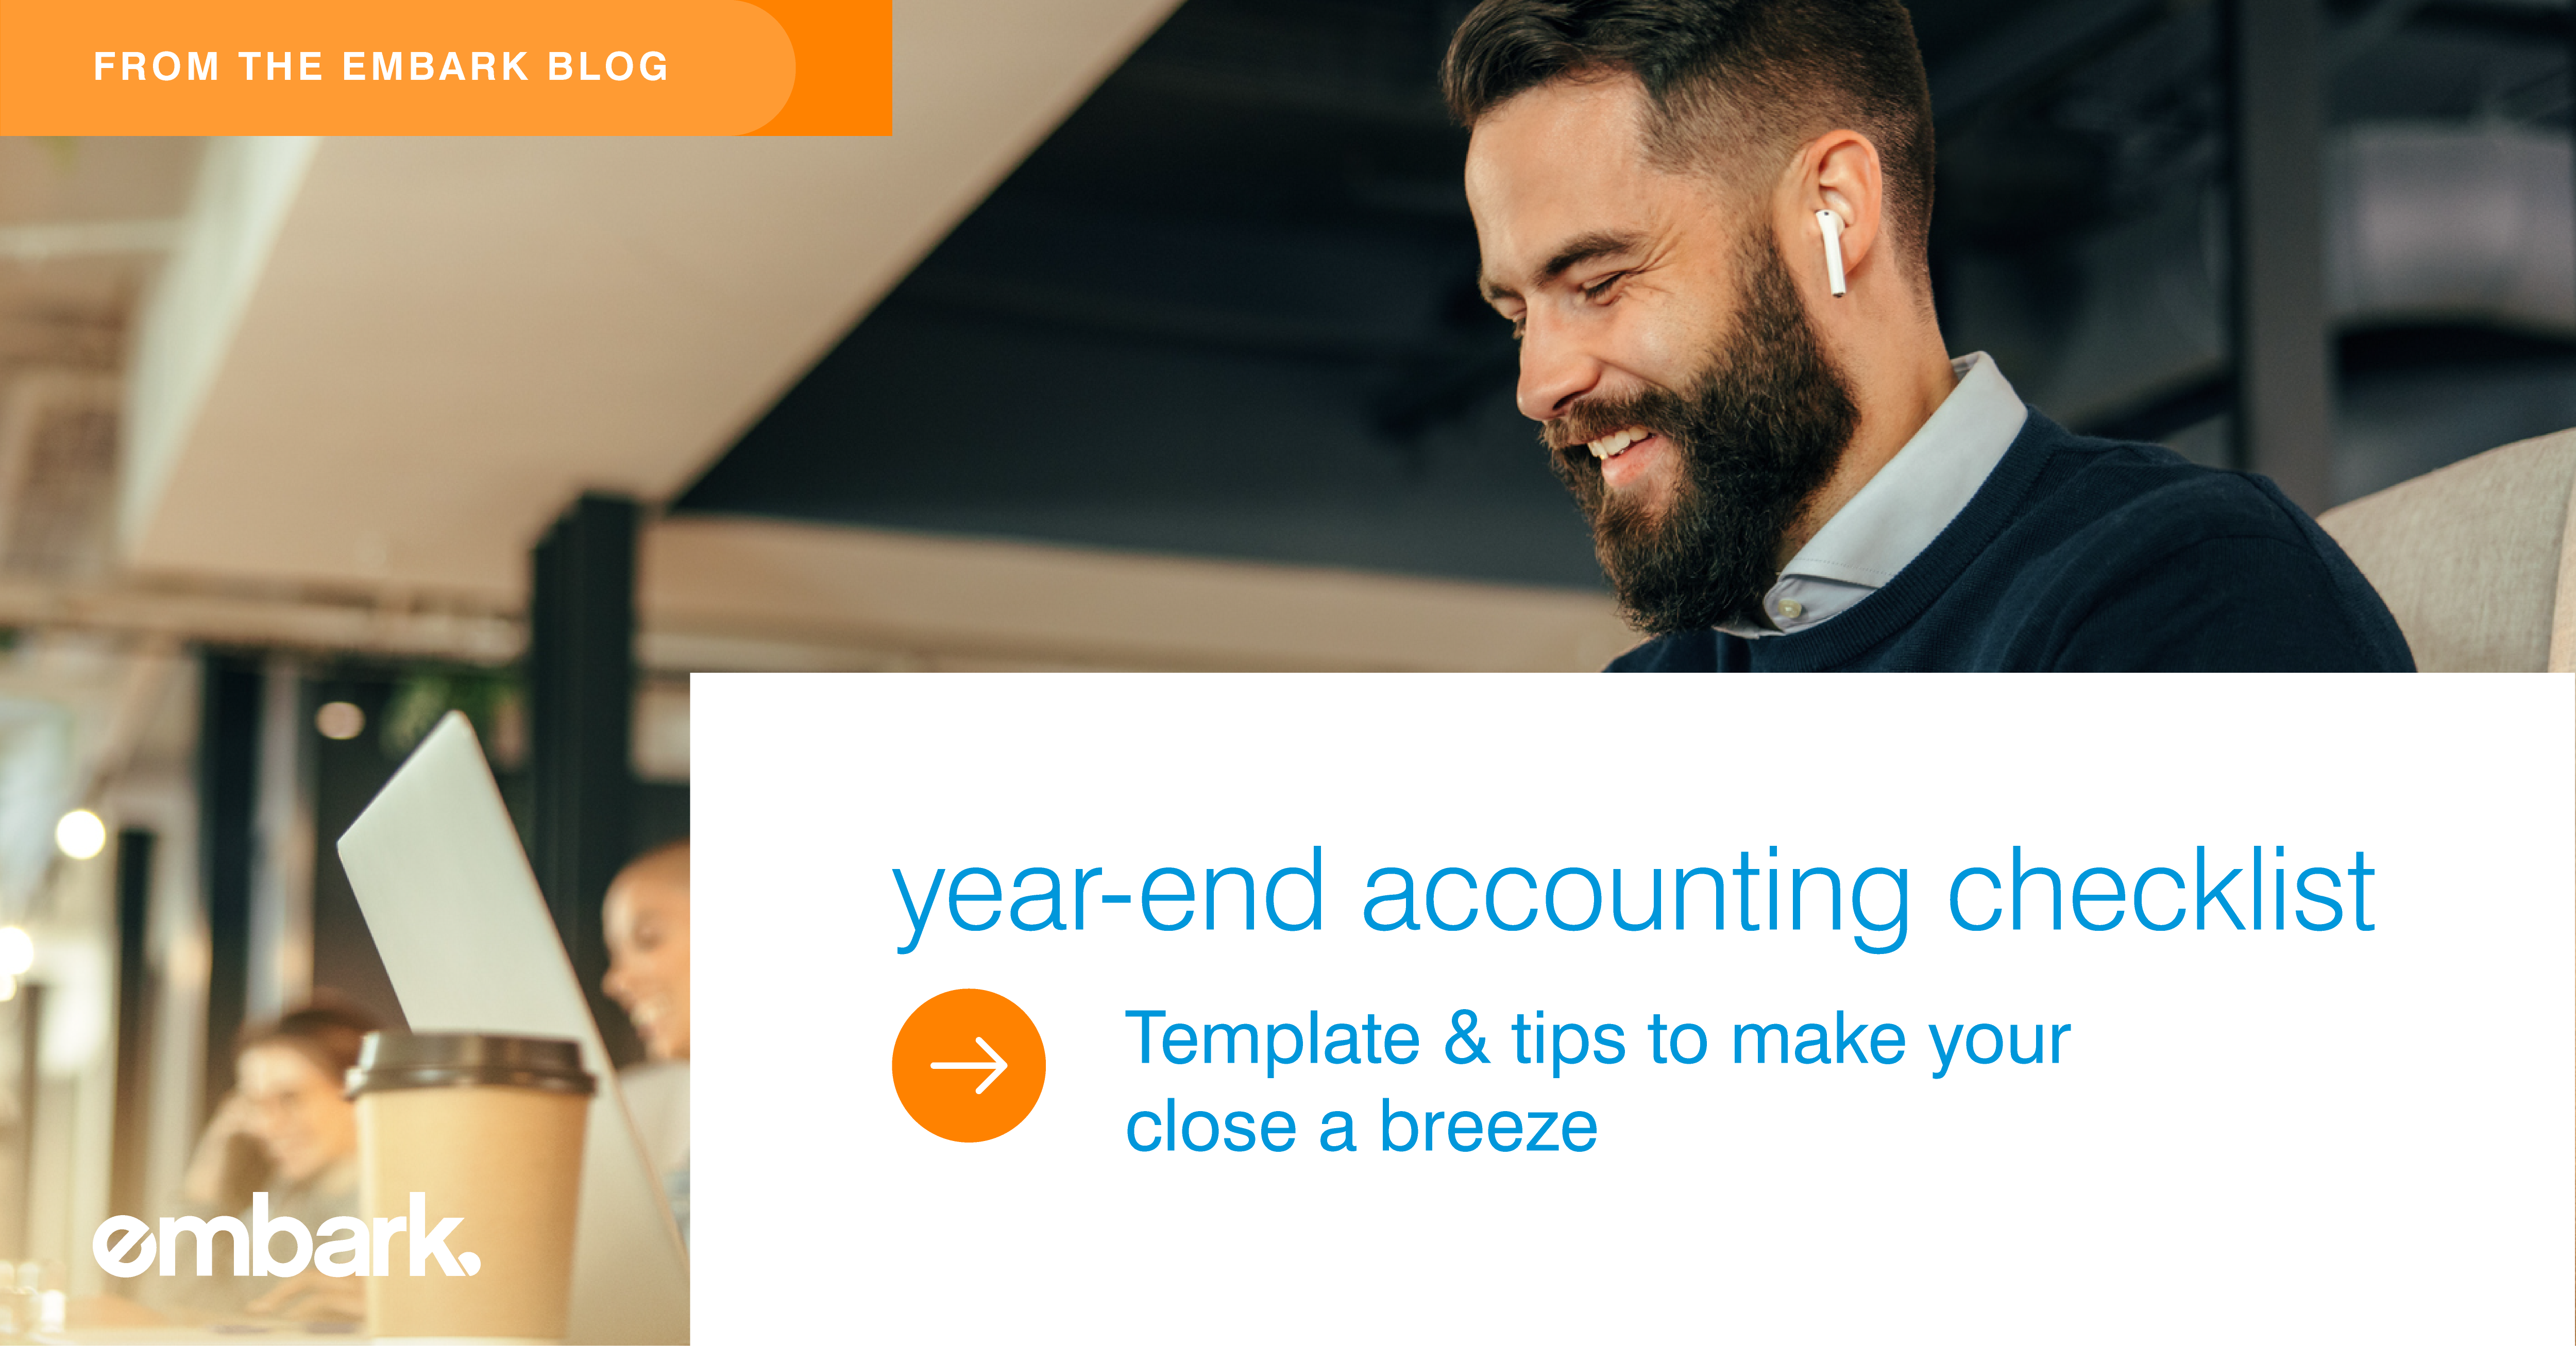 The Year-End Accounting Checklist & Other Tips to Make Your Close a Breeze